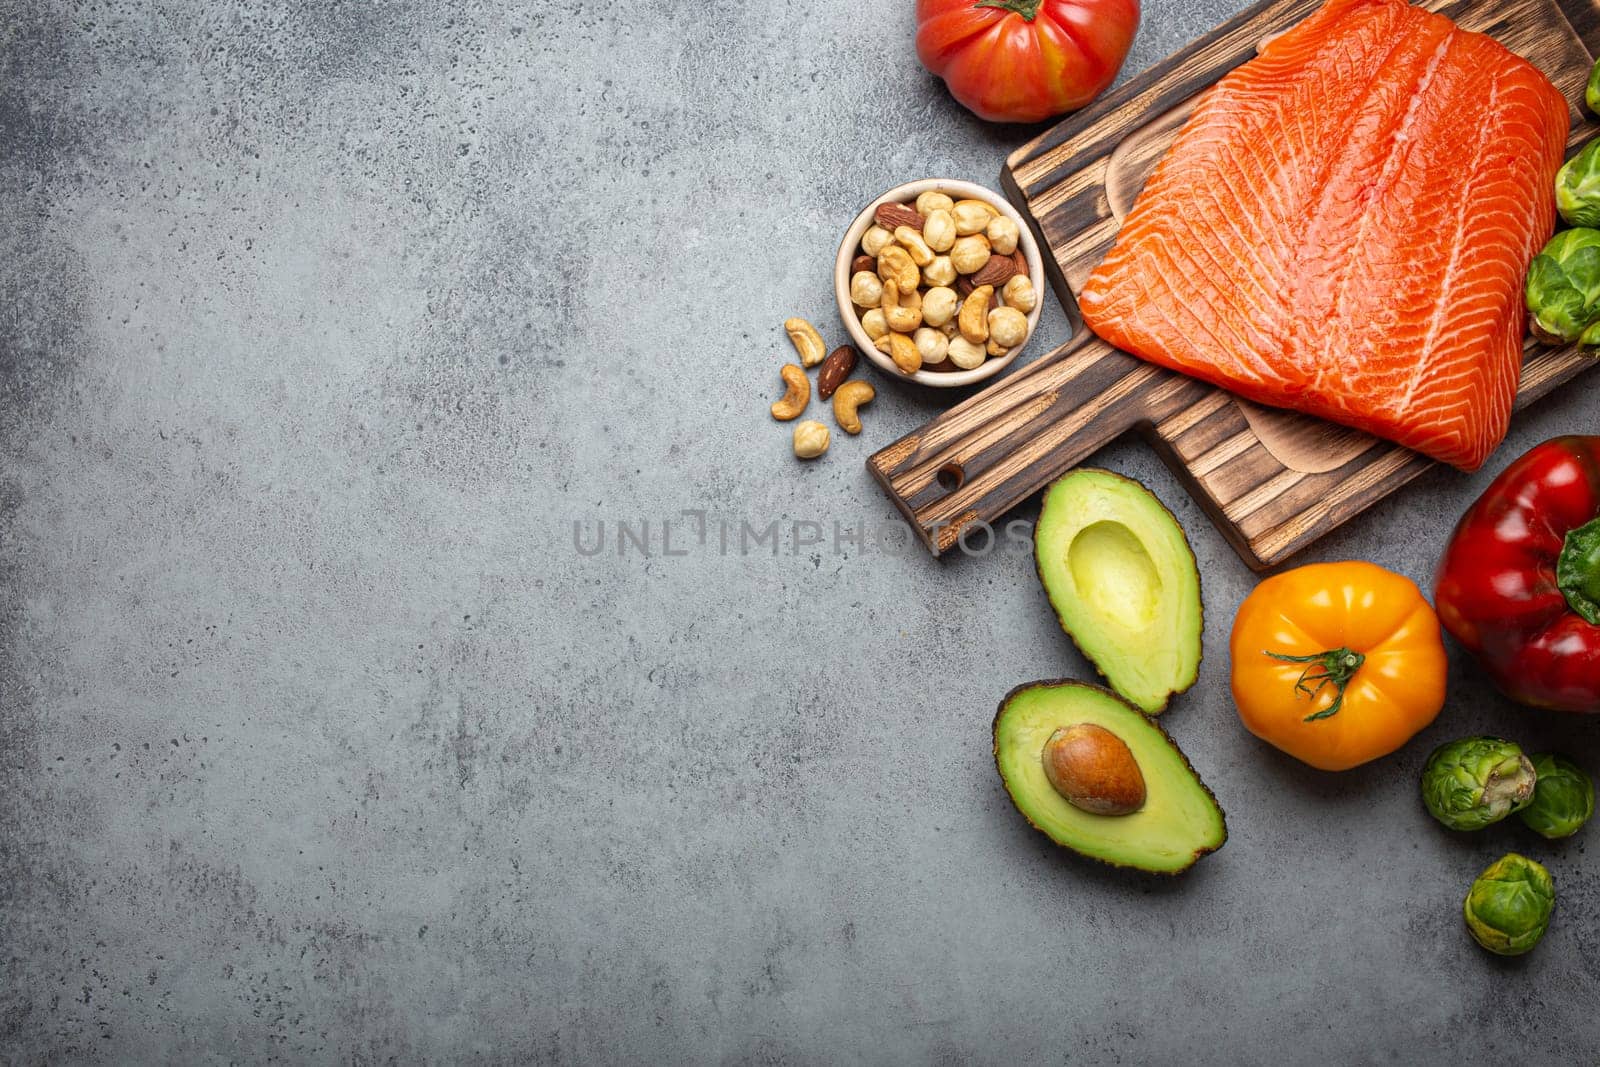 Fresh raw salmon fillet on wooden cutting board, organic bio vegetables and nuts, rustic stone grey background top view. Ingredients full of vitamins for healthy diet and nutrition, space for text by its_al_dente